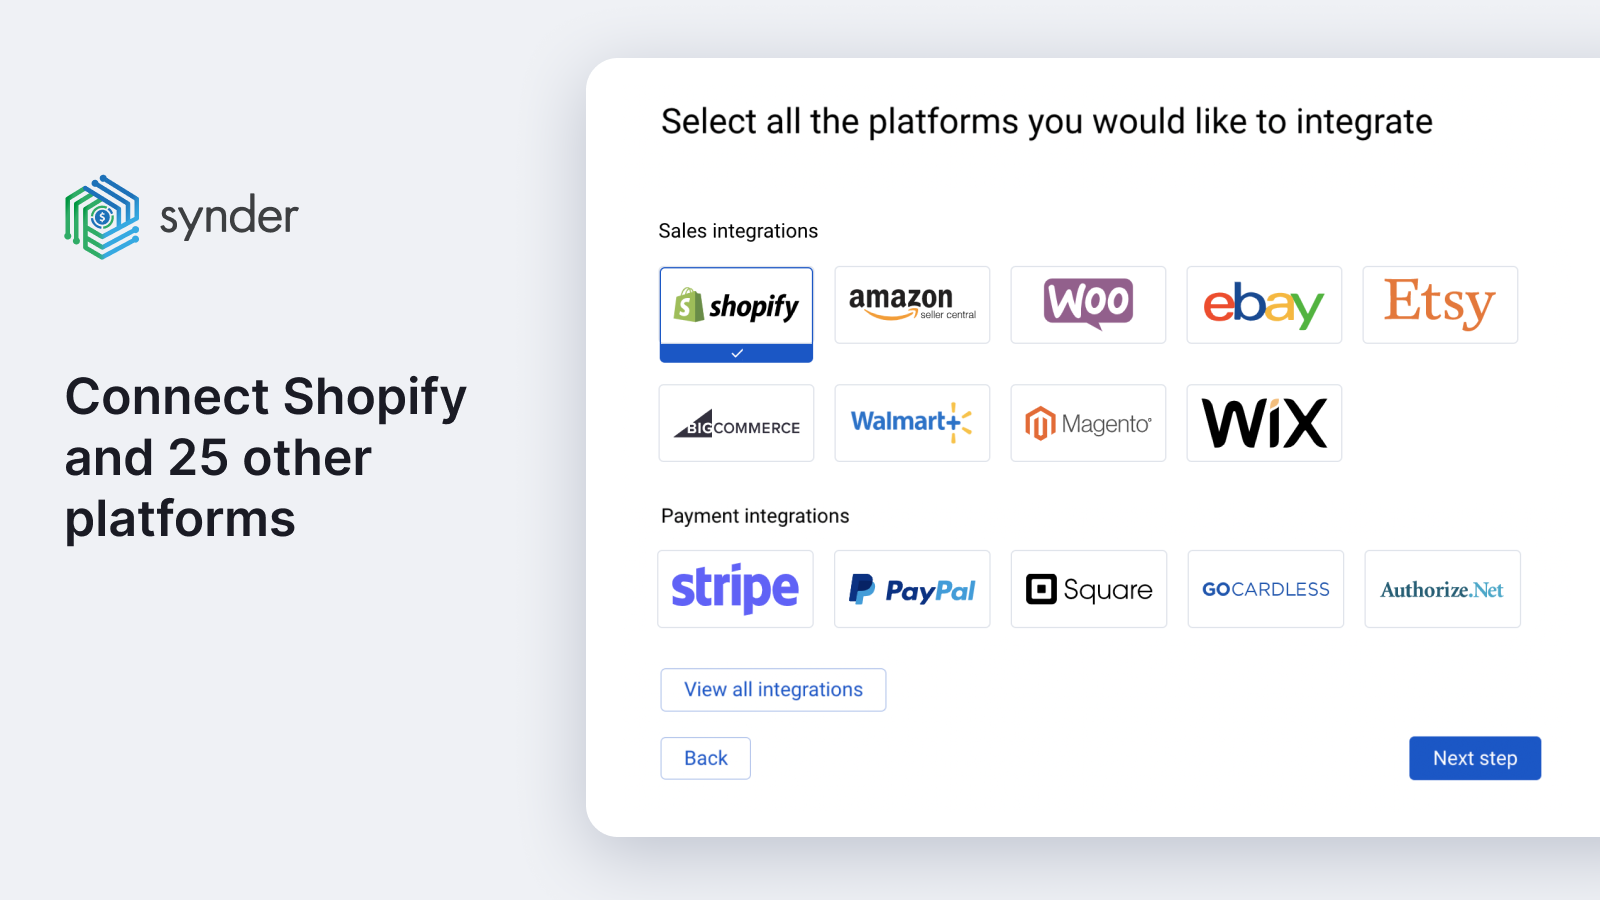 Connect all your sales channels under one roof -Amazon,Ebay,Etsy